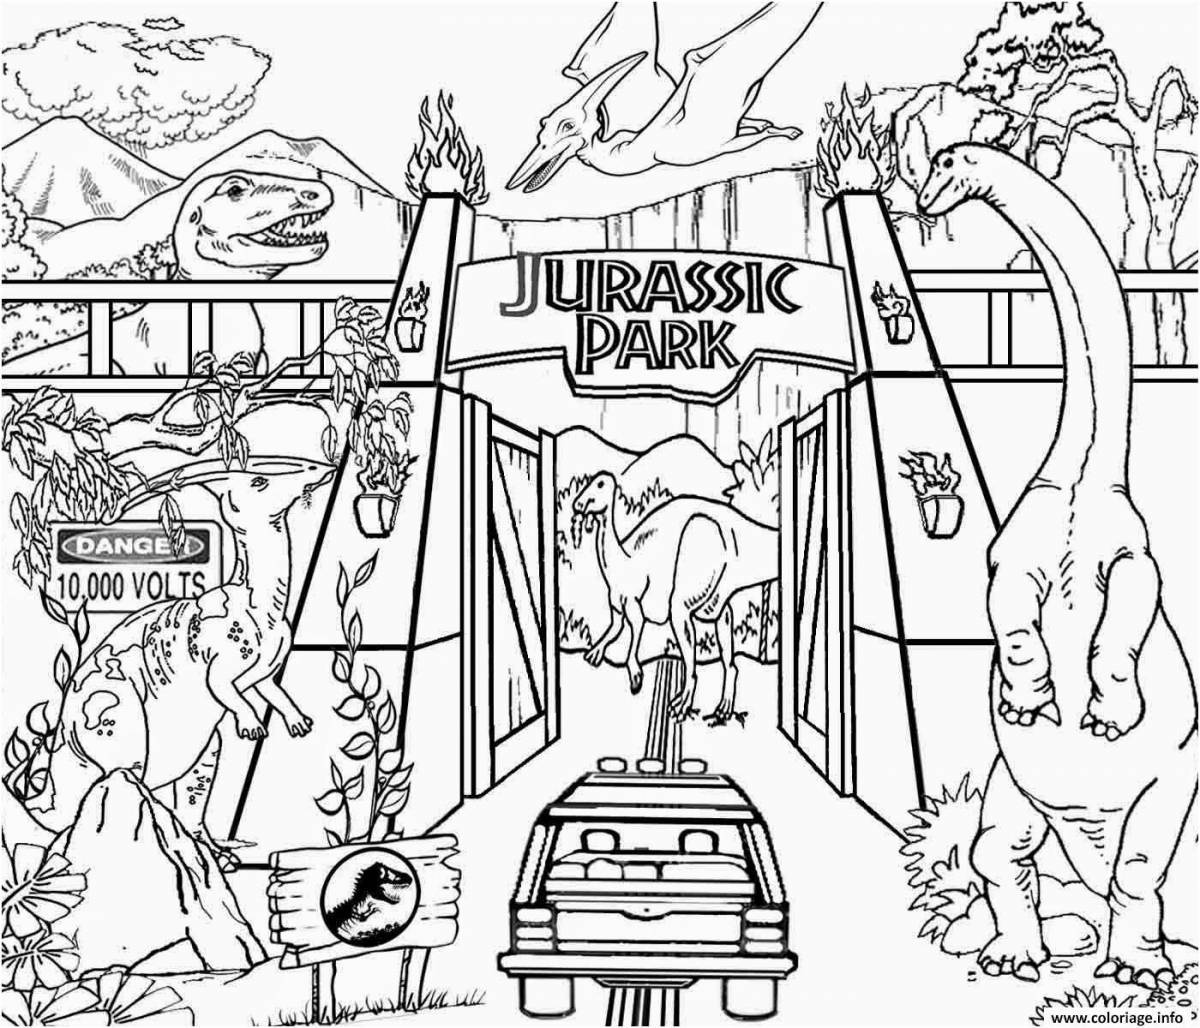 Large jurassic park coloring book